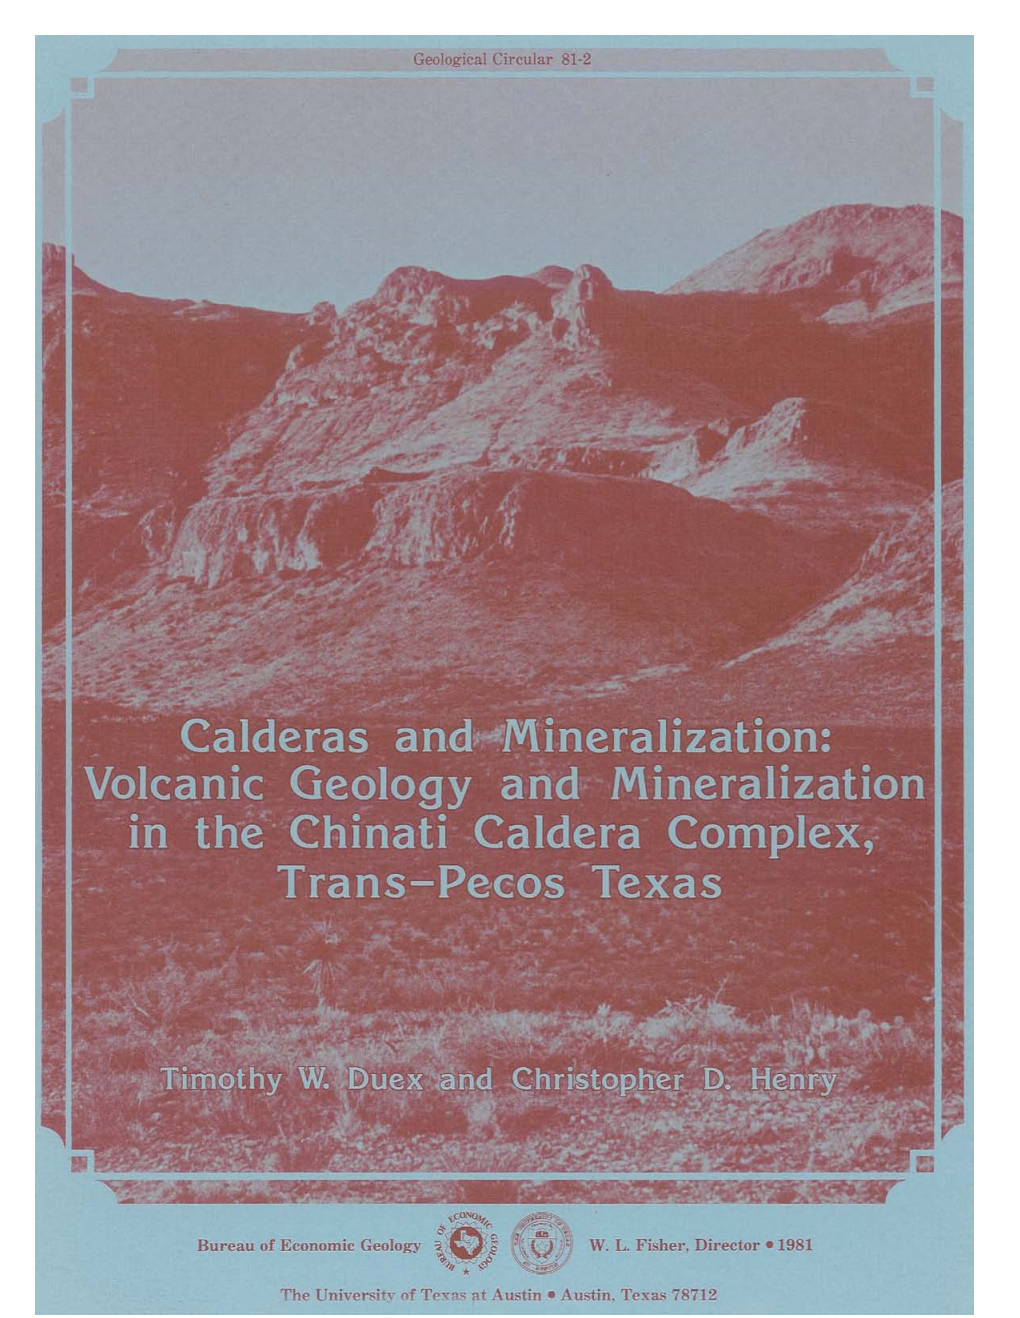 Volcanic Geology and Mineralization in the Chinati Caldera Complex, Trans-Pecos Texas